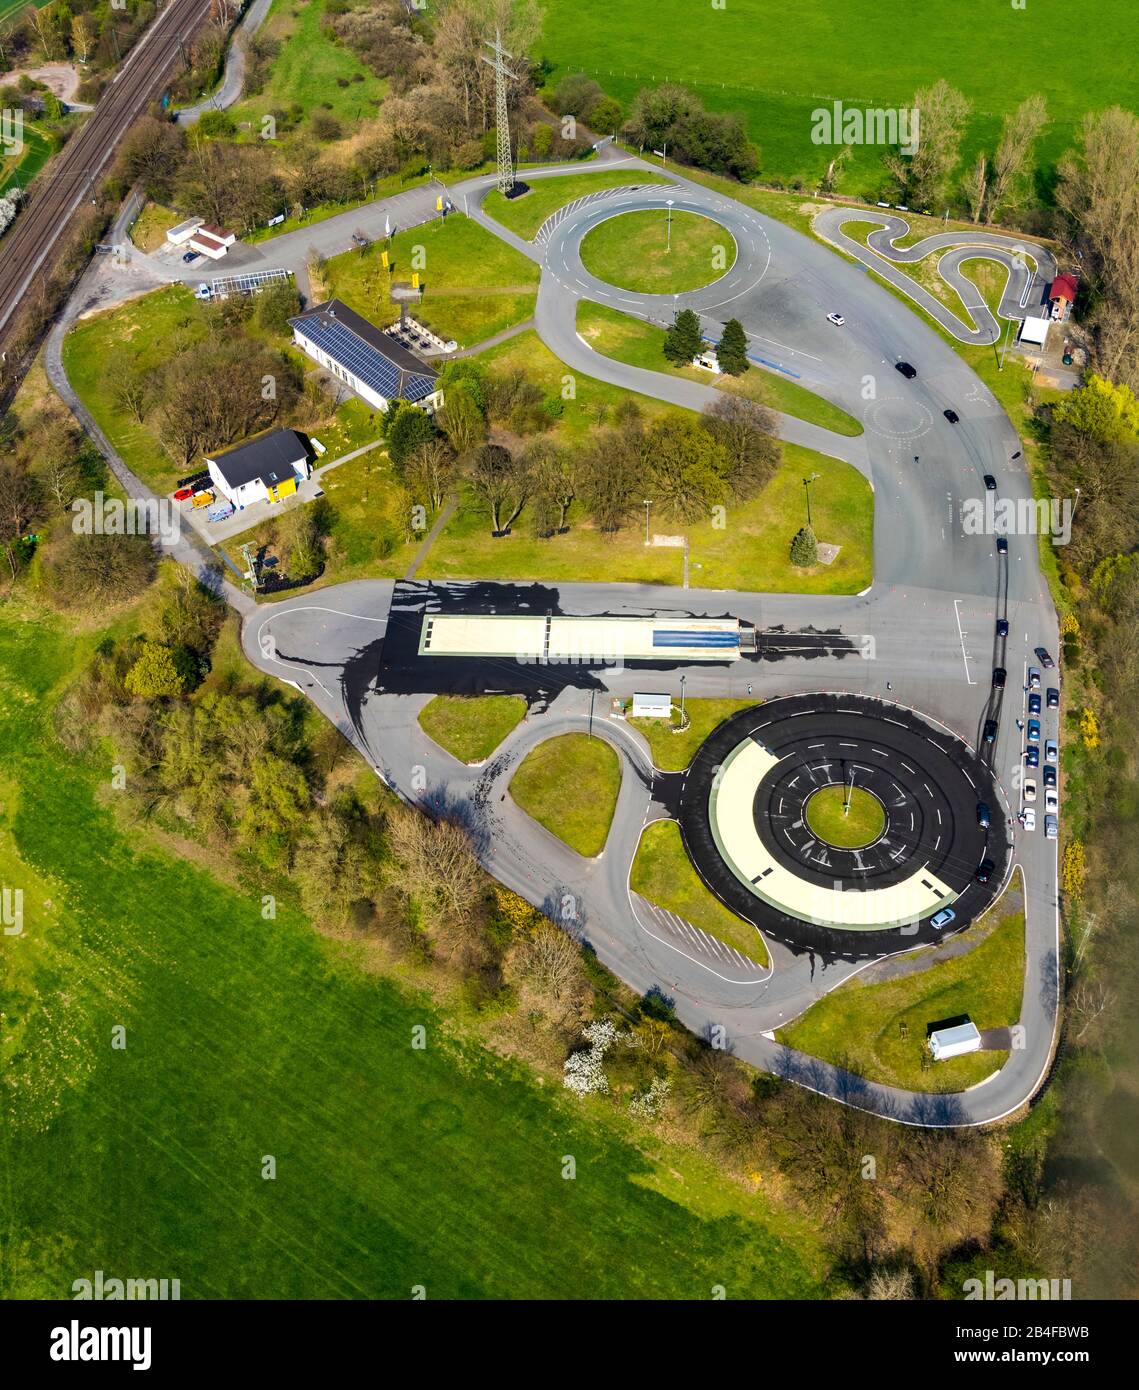 Aerial view of the ADAC driving safety center Haltern am See, traffic training course with spin course in Haltern am See in the Ruhr area in the state of North Rhine-Westphalia, Germany. Stock Photo